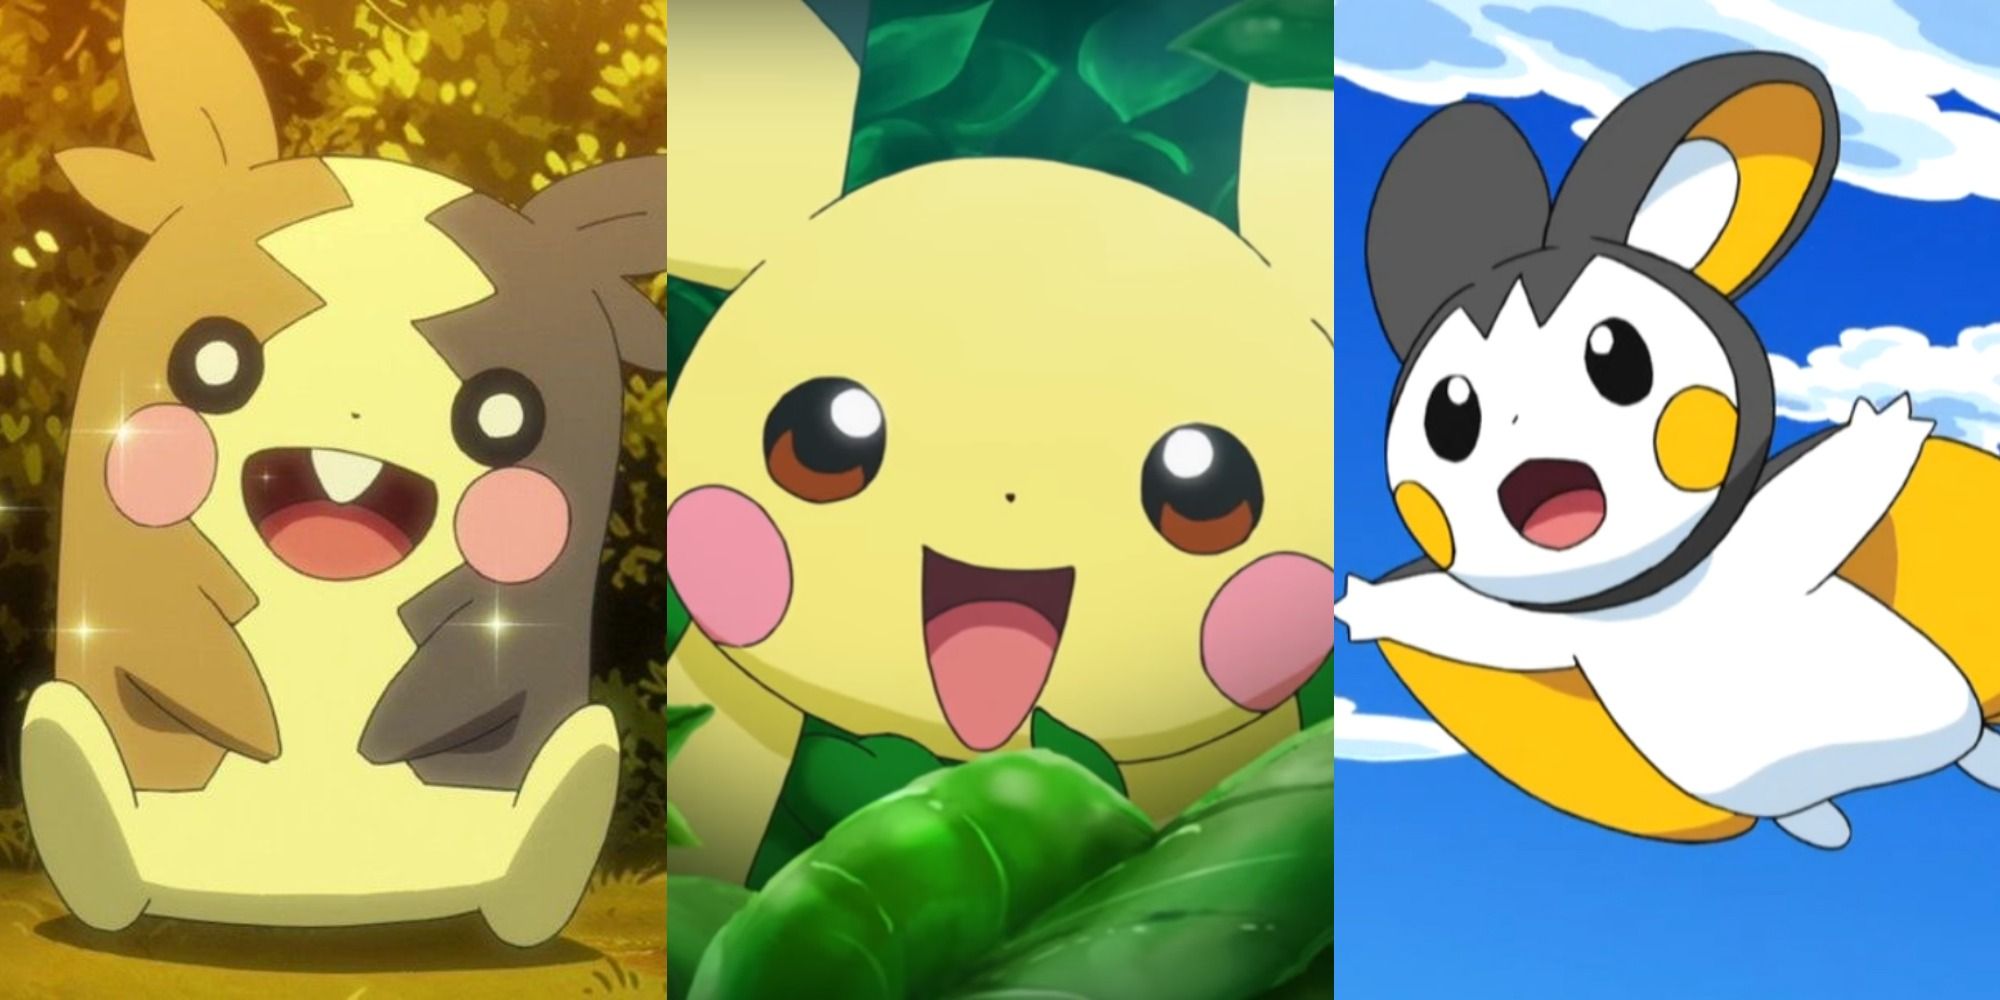 Every Pokémon Type Ranked From Lamest To Strongest